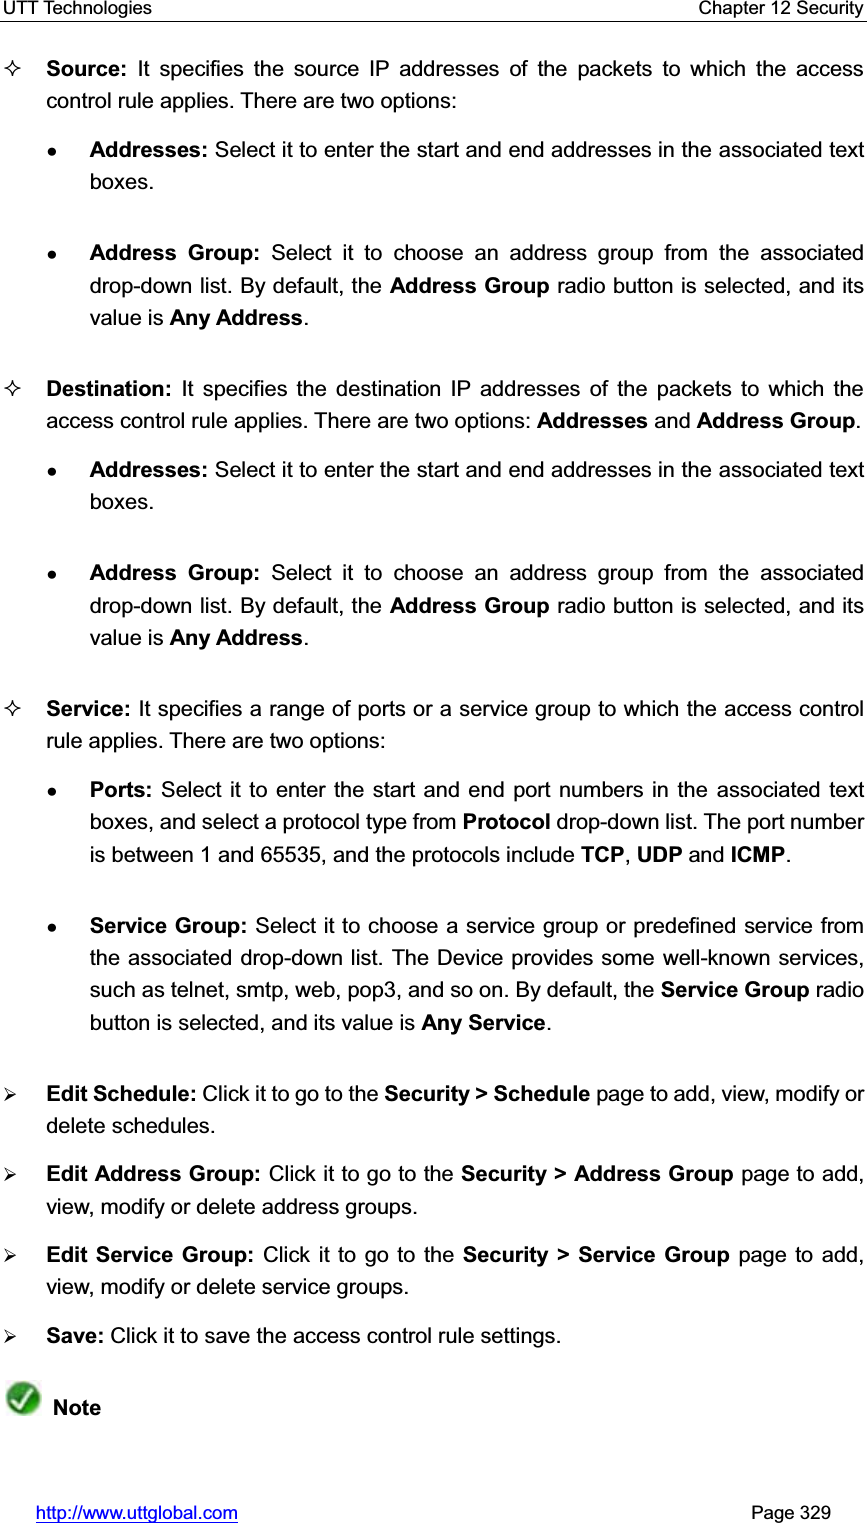 UTT Technologies    Chapter 12 Security   http://www.uttglobal.com                                                       Page 329 Source: It specifies the source IP addresses of the packets to which the access control rule applies. There are two options:   ƔAddresses: Select it to enter the start and end addresses in the associated text boxes. ƔAddress Group: Select it to choose an address group from the associated drop-down list. By default, the Address Group radio button is selected, and its value is Any Address.Destination: It specifies the destination IP addresses of the packets to which the access control rule applies. There are two options: Addresses and Address Group.ƔAddresses: Select it to enter the start and end addresses in the associated text boxes. ƔAddress Group: Select it to choose an address group from the associated drop-down list. By default, the Address Group radio button is selected, and its value is Any Address.Service: It specifies a range of ports or a service group to which the access control rule applies. There are two options: ƔPorts: Select it to enter the start and end port numbers in the associated text boxes, and select a protocol type from Protocol drop-down list. The port number is between 1 and 65535, and the protocols include TCP,UDP and ICMP.ƔService Group: Select it to choose a service group or predefined service from the associated drop-down list. The Device provides some well-known services, such as telnet, smtp, web, pop3, and so on. By default, the Service Group radio button is selected, and its value is Any Service.¾Edit Schedule: Click it to go to the Security &gt; Schedule page to add, view, modify or delete schedules.¾Edit Address Group: Click it to go to the Security &gt; Address Group page to add, view, modify or delete address groups.¾Edit Service Group: Click it to go to the Security &gt; Service Group page to add, view, modify or delete service groups.¾Save: Click it to save the access control rule settings.Note